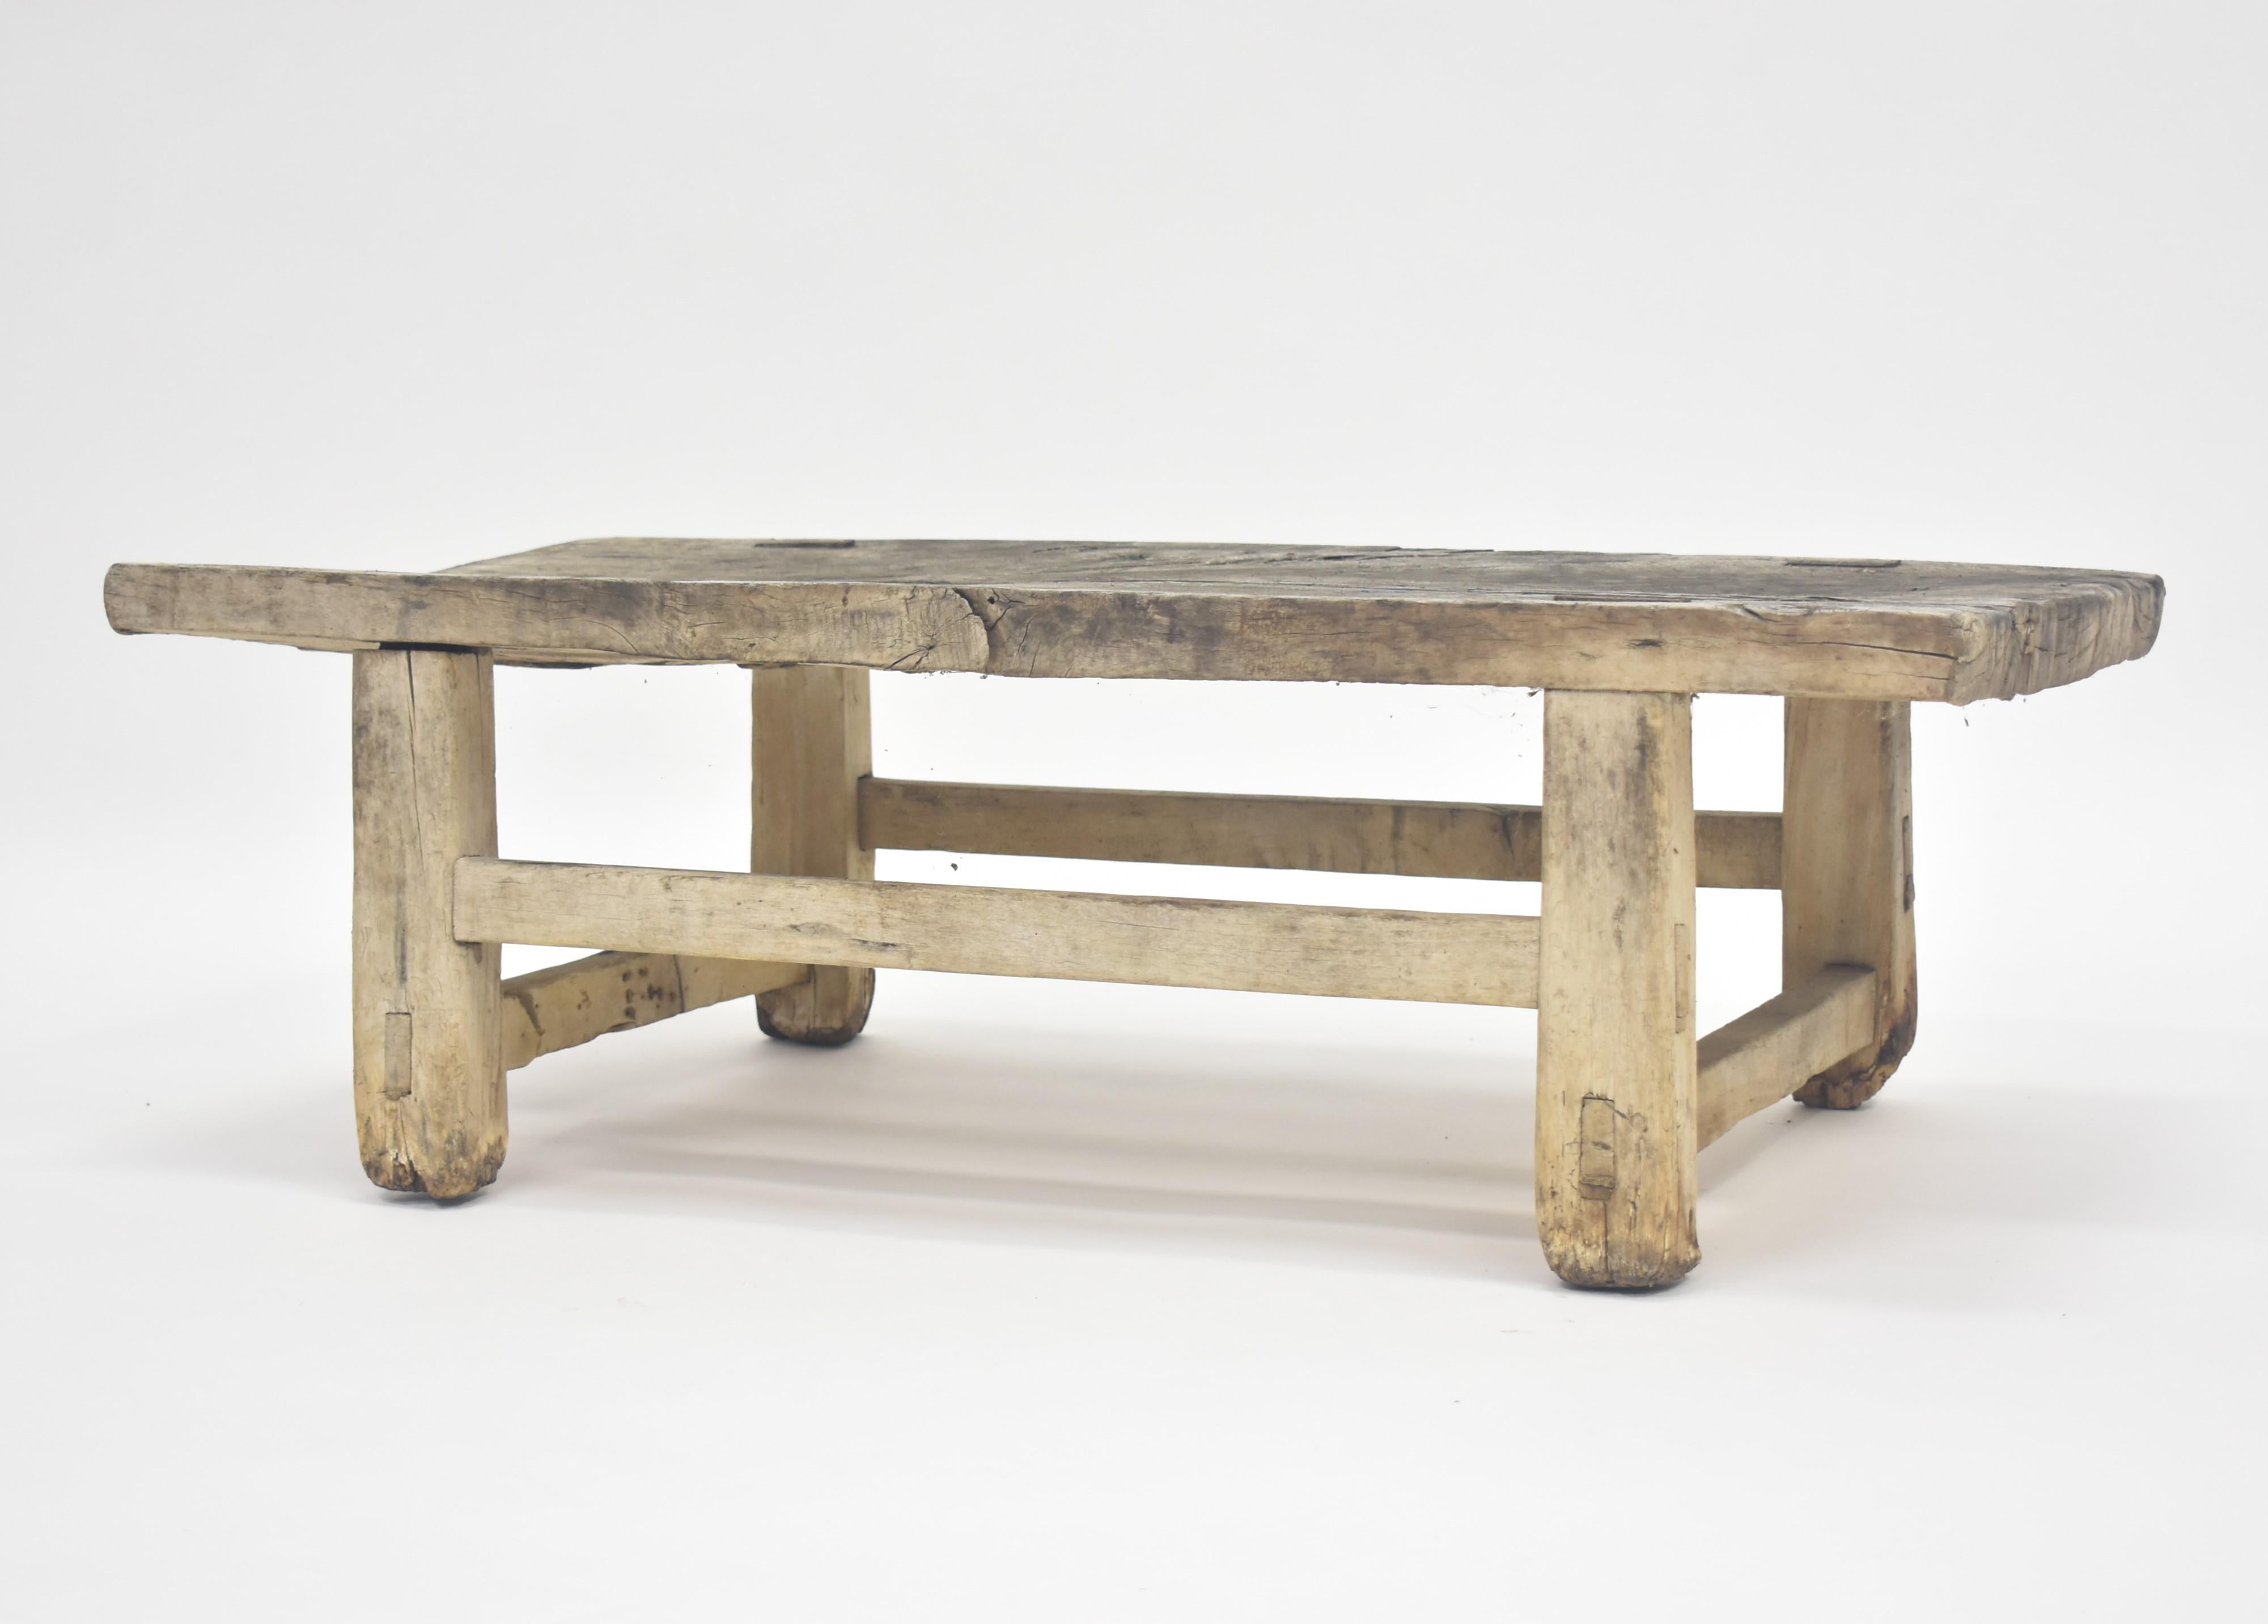 Rustic French rectangular wooden coffee table perfect for inside or outside. 